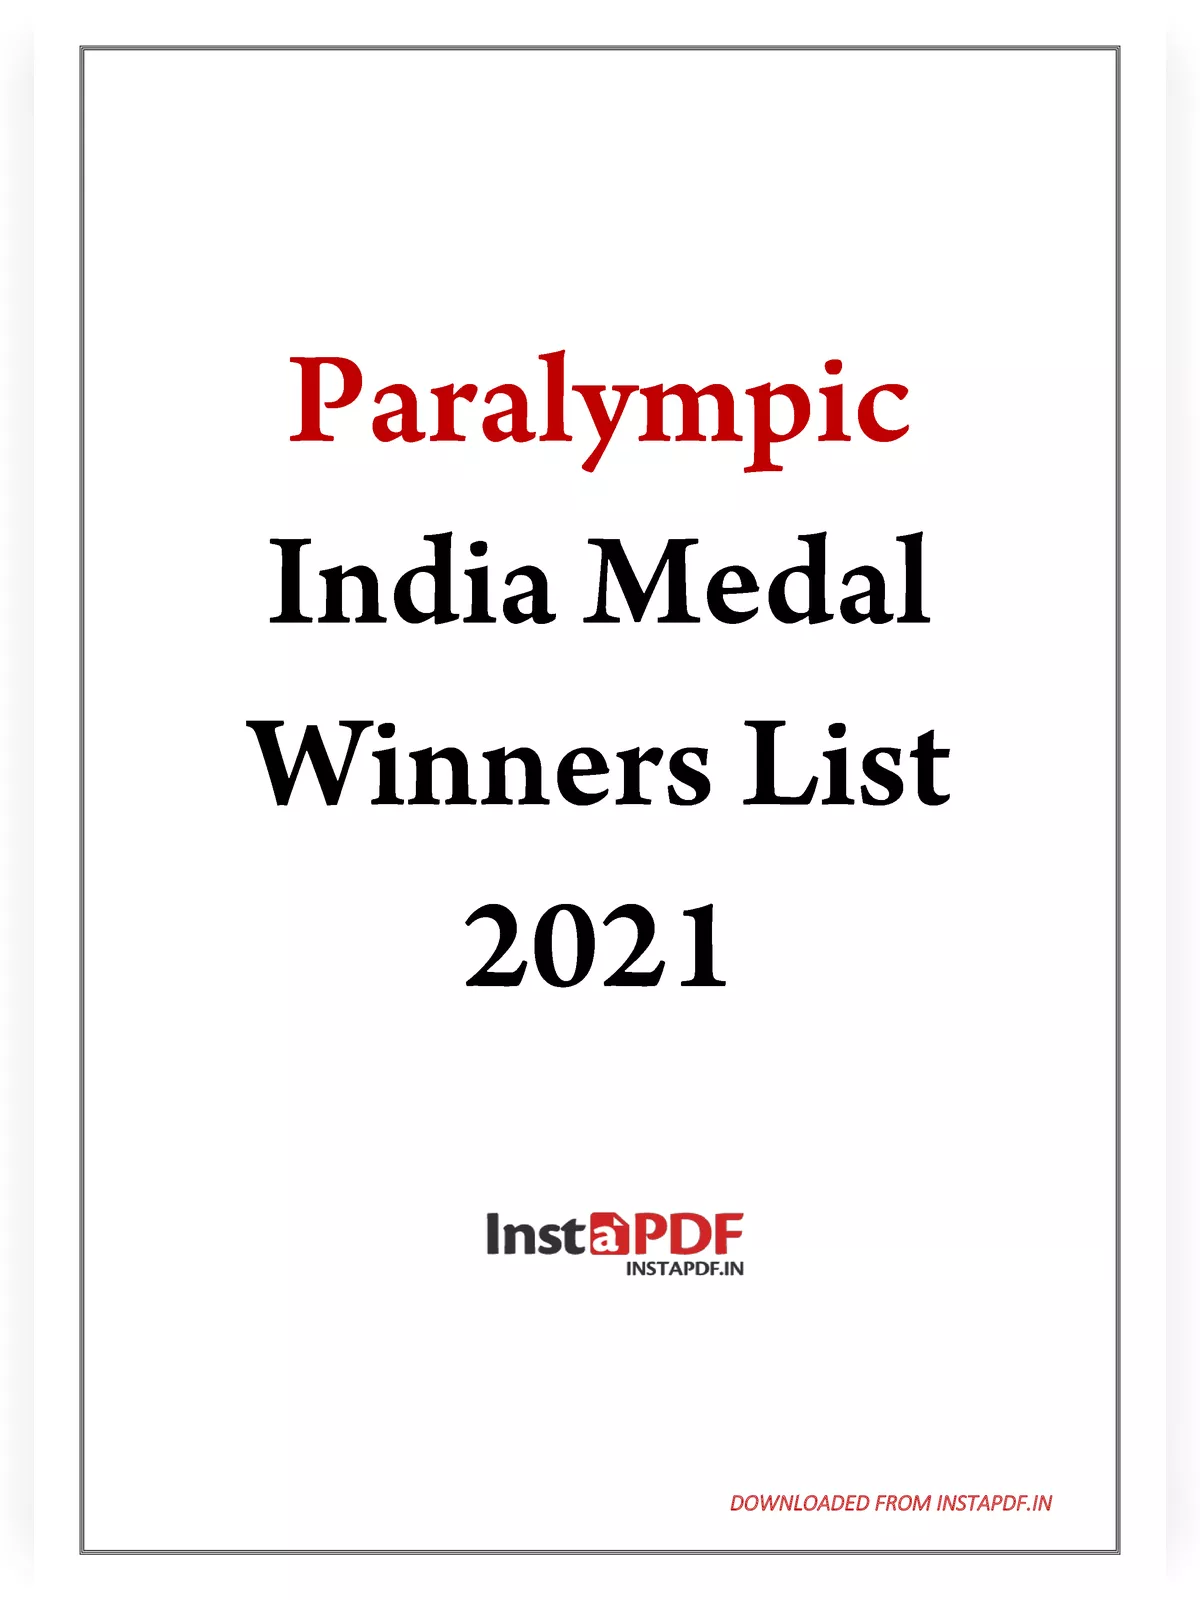 Paralympic India Medal Winners List 2021